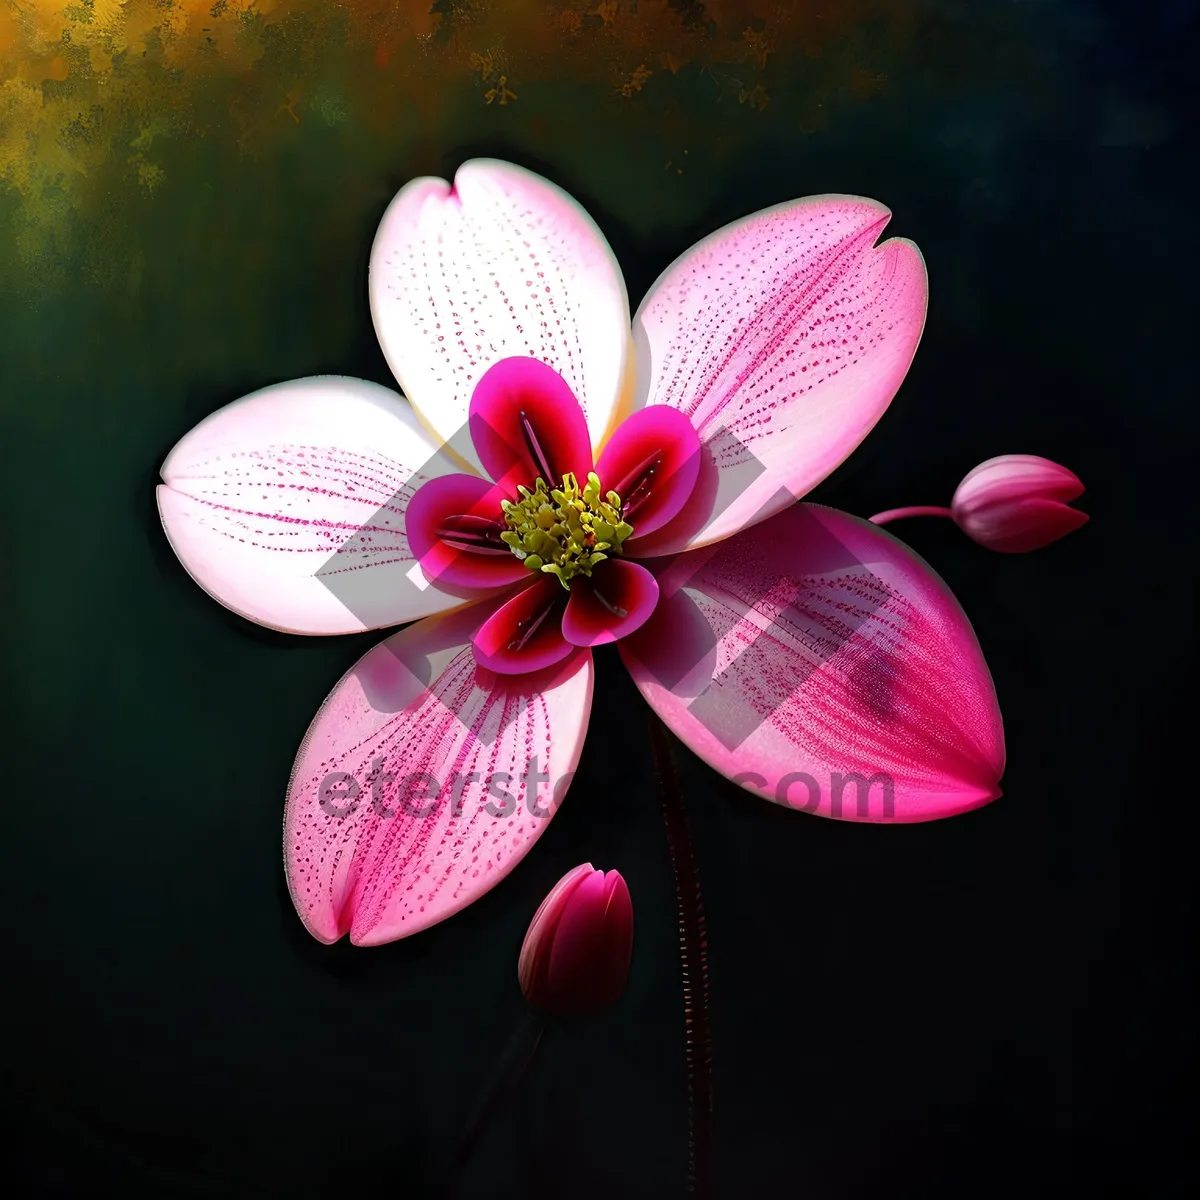 Picture of Exquisite Orchid Blossom in Pink Petals